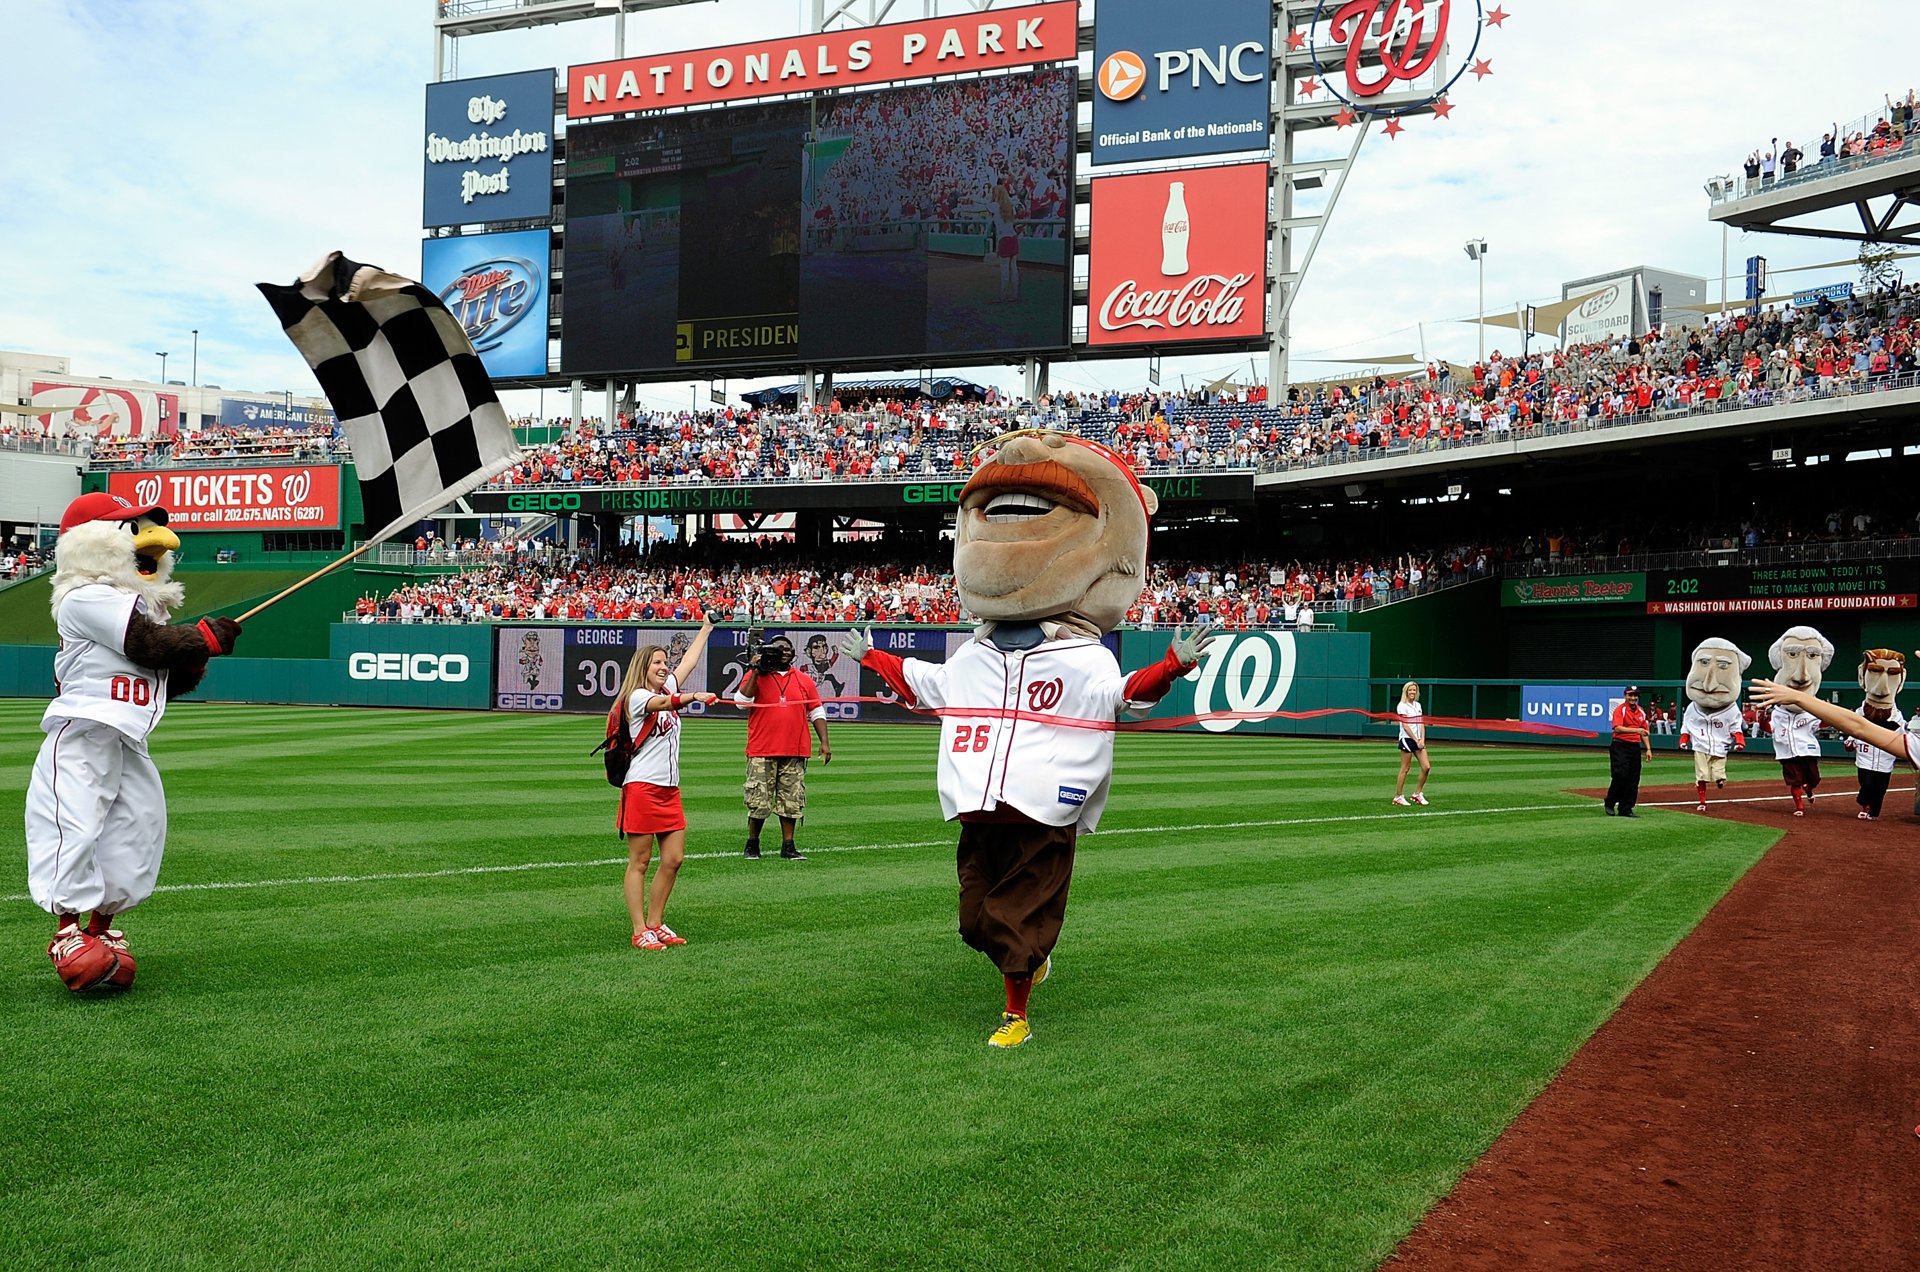 Washington Nationals mascot Teddy Roosevelt wins the presidents' race, a home game tradition at Nationals Park in Washington, D.C.